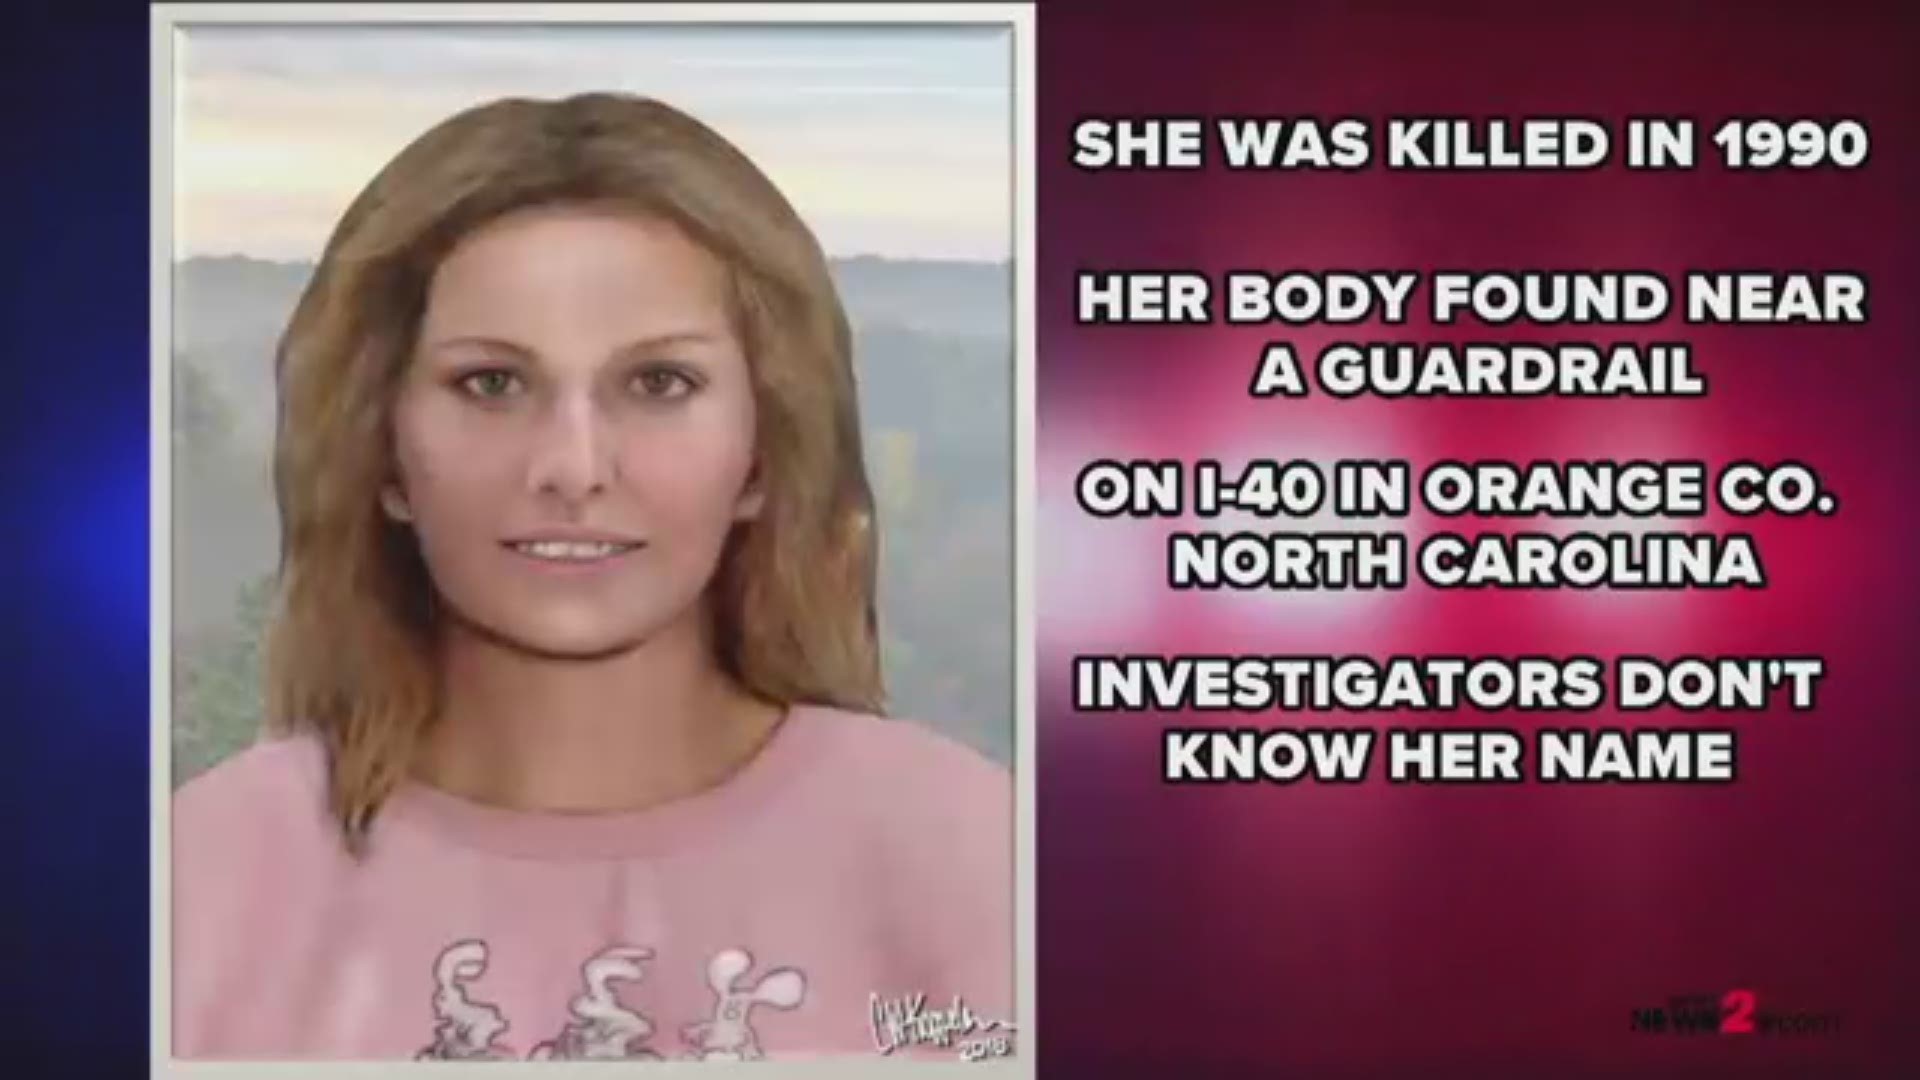 Investigators named her New Hope Jane Doe after her body was found in 1990 near the New Hope exit on I-40 in Orange County, North Carolina. If you have any informati